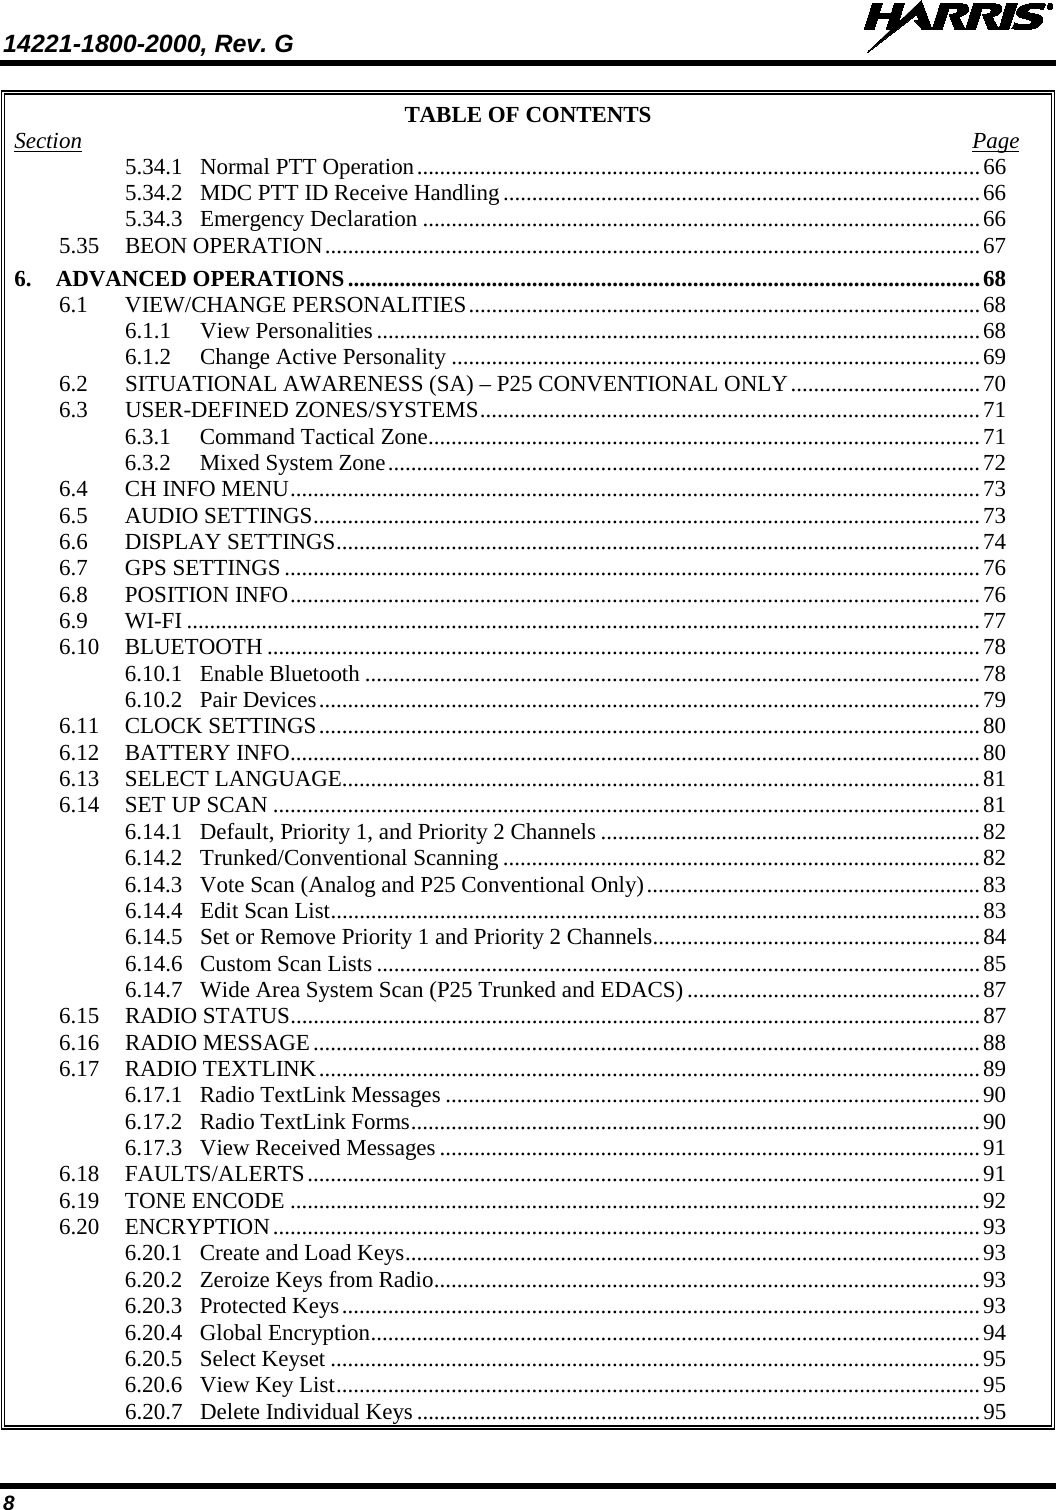 14221-1800-2000, Rev. G   8 TABLE OF CONTENTS Section  Page 5.34.1 Normal PTT Operation .................................................................................................. 66 5.34.2 MDC PTT ID Receive Handling ................................................................................... 66 5.34.3 Emergency Declaration ................................................................................................. 66 5.35 BEON OPERATION .................................................................................................................. 67 6. ADVANCED OPERATIONS .............................................................................................................. 68 6.1 VIEW/CHANGE PERSONALITIES ......................................................................................... 68 6.1.1 View Personalities ......................................................................................................... 68 6.1.2 Change Active Personality ............................................................................................ 69 6.2 SITUATIONAL AWARENESS (SA) – P25 CONVENTIONAL ONLY ................................. 70 6.3 USER-DEFINED ZONES/SYSTEMS ....................................................................................... 71 6.3.1 Command Tactical Zone ................................................................................................ 71 6.3.2 Mixed System Zone ....................................................................................................... 72 6.4 CH INFO MENU ........................................................................................................................ 73 6.5 AUDIO SETTINGS .................................................................................................................... 73 6.6 DISPLAY SETTINGS ................................................................................................................ 74 6.7 GPS SETTINGS ......................................................................................................................... 76 6.8 POSITION INFO ........................................................................................................................ 76 6.9 WI-FI .......................................................................................................................................... 77 6.10 BLUETOOTH ............................................................................................................................ 78 6.10.1 Enable Bluetooth ........................................................................................................... 78 6.10.2 Pair Devices ................................................................................................................... 79 6.11 CLOCK SETTINGS ................................................................................................................... 80 6.12 BATTERY INFO ........................................................................................................................ 80 6.13 SELECT LANGUAGE............................................................................................................... 81 6.14 SET UP SCAN ........................................................................................................................... 81 6.14.1 Default, Priority 1, and Priority 2 Channels .................................................................. 82 6.14.2 Trunked/Conventional Scanning ................................................................................... 82 6.14.3 Vote Scan (Analog and P25 Conventional Only) .......................................................... 83 6.14.4 Edit Scan List ................................................................................................................. 83 6.14.5 Set or Remove Priority 1 and Priority 2 Channels ......................................................... 84 6.14.6 Custom Scan Lists ......................................................................................................... 85 6.14.7 Wide Area System Scan (P25 Trunked and EDACS) ................................................... 87 6.15 RADIO STATUS ........................................................................................................................ 87 6.16 RADIO MESSAGE .................................................................................................................... 88 6.17 RADIO TEXTLINK ................................................................................................................... 89 6.17.1 Radio TextLink Messages ............................................................................................. 90 6.17.2 Radio TextLink Forms ................................................................................................... 90 6.17.3 View Received Messages .............................................................................................. 91 6.18 FAULTS/ALERTS ..................................................................................................................... 91 6.19 TONE ENCODE ........................................................................................................................ 92 6.20 ENCRYPTION ........................................................................................................................... 93 6.20.1 Create and Load Keys .................................................................................................... 93 6.20.2 Zeroize Keys from Radio ............................................................................................... 93 6.20.3 Protected Keys ............................................................................................................... 93 6.20.4 Global Encryption .......................................................................................................... 94 6.20.5 Select Keyset ................................................................................................................. 95 6.20.6 View Key List ................................................................................................................ 95 6.20.7 Delete Individual Keys .................................................................................................. 95 